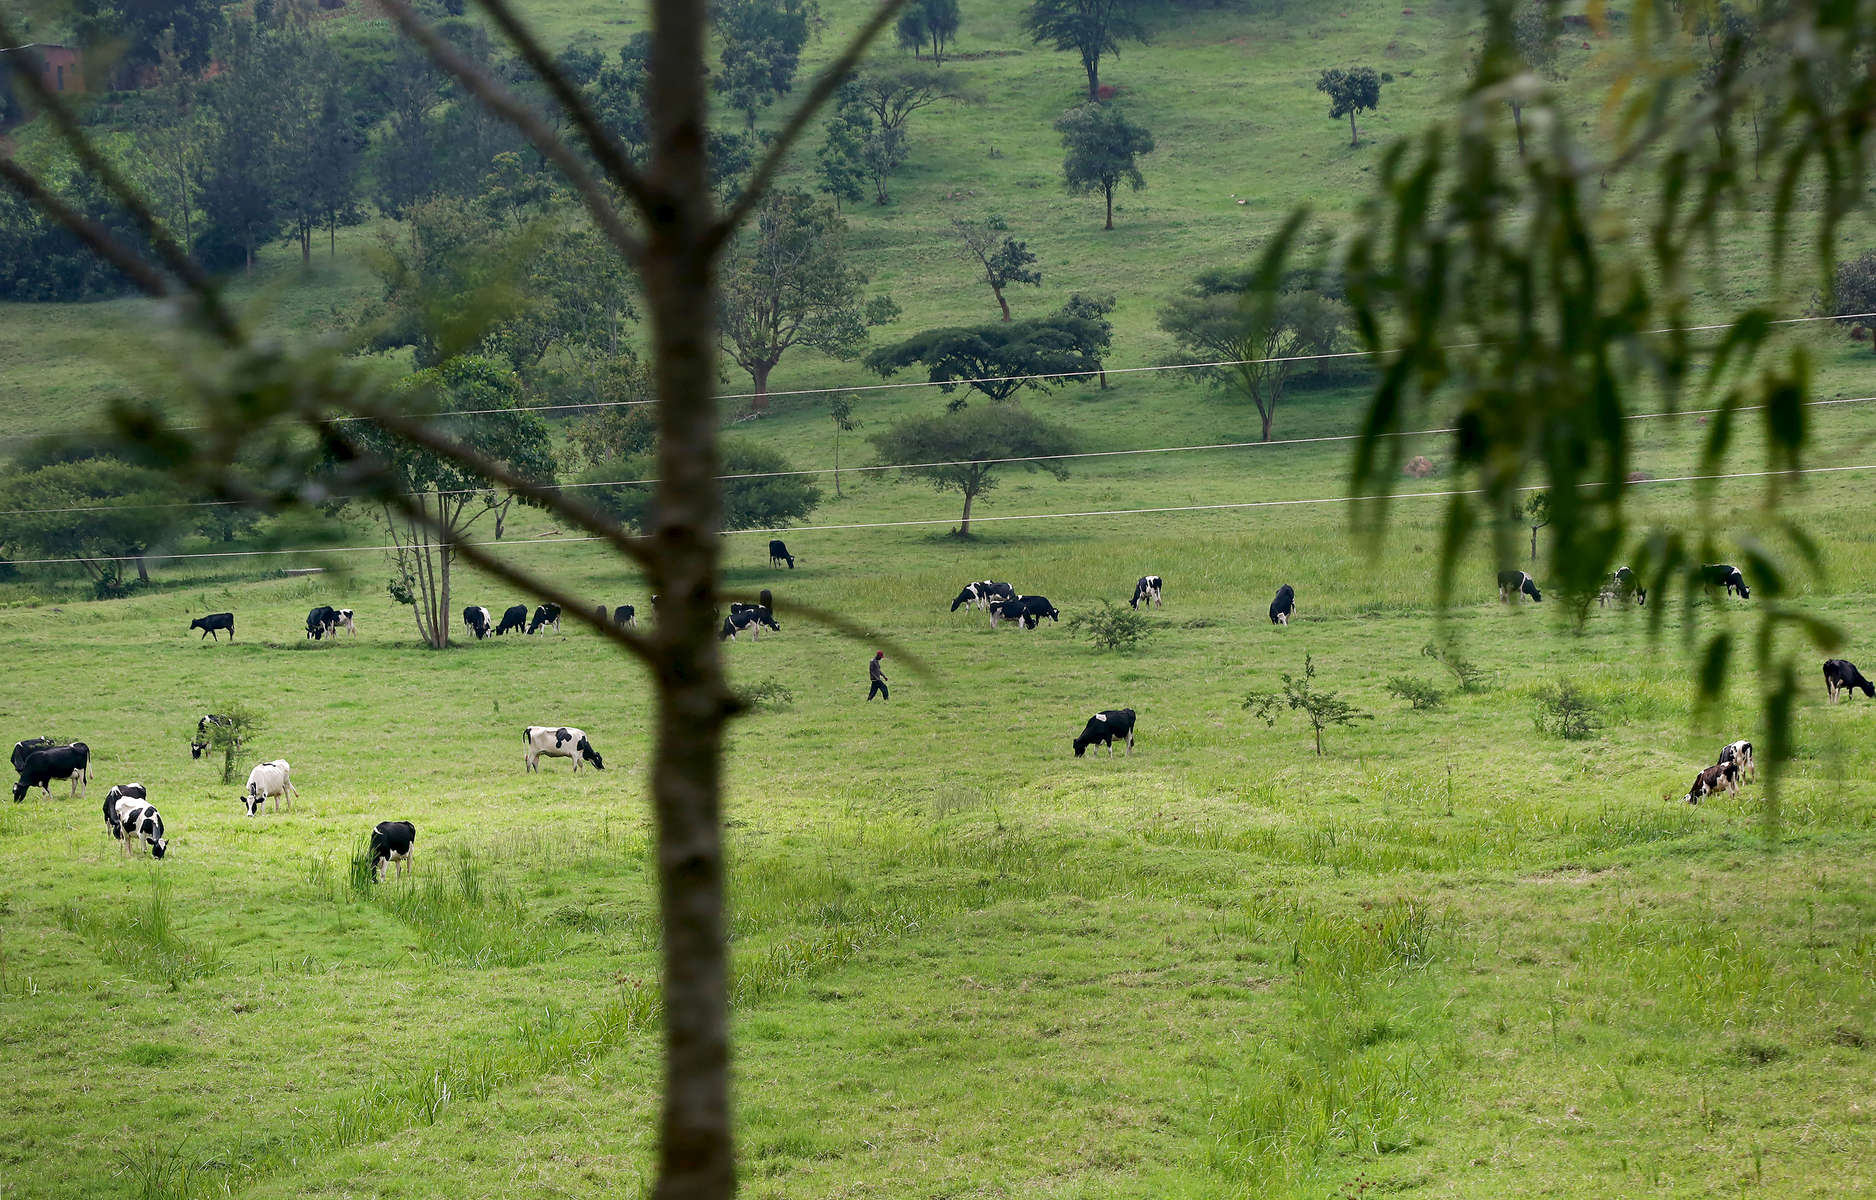 Cows seen out on pasture on November 18, 2017 in Kigali, Rwanda. Nearly half of all Rwandans live in poverty, relying on small-scale farming for survival without gas or electricity. With so many women and children spending hours of the day foraging for wood used for cooking and light, often damaging their eyes, lungs, the forests and atmosphere, a little inventiveness helps. Enter cow and enter pig -- not just as a source of food, but also the heat needed to cook it. Or more specifically, their poo -- the fuel fed to a biogas digester, a tank that converts organic waste into methane. 